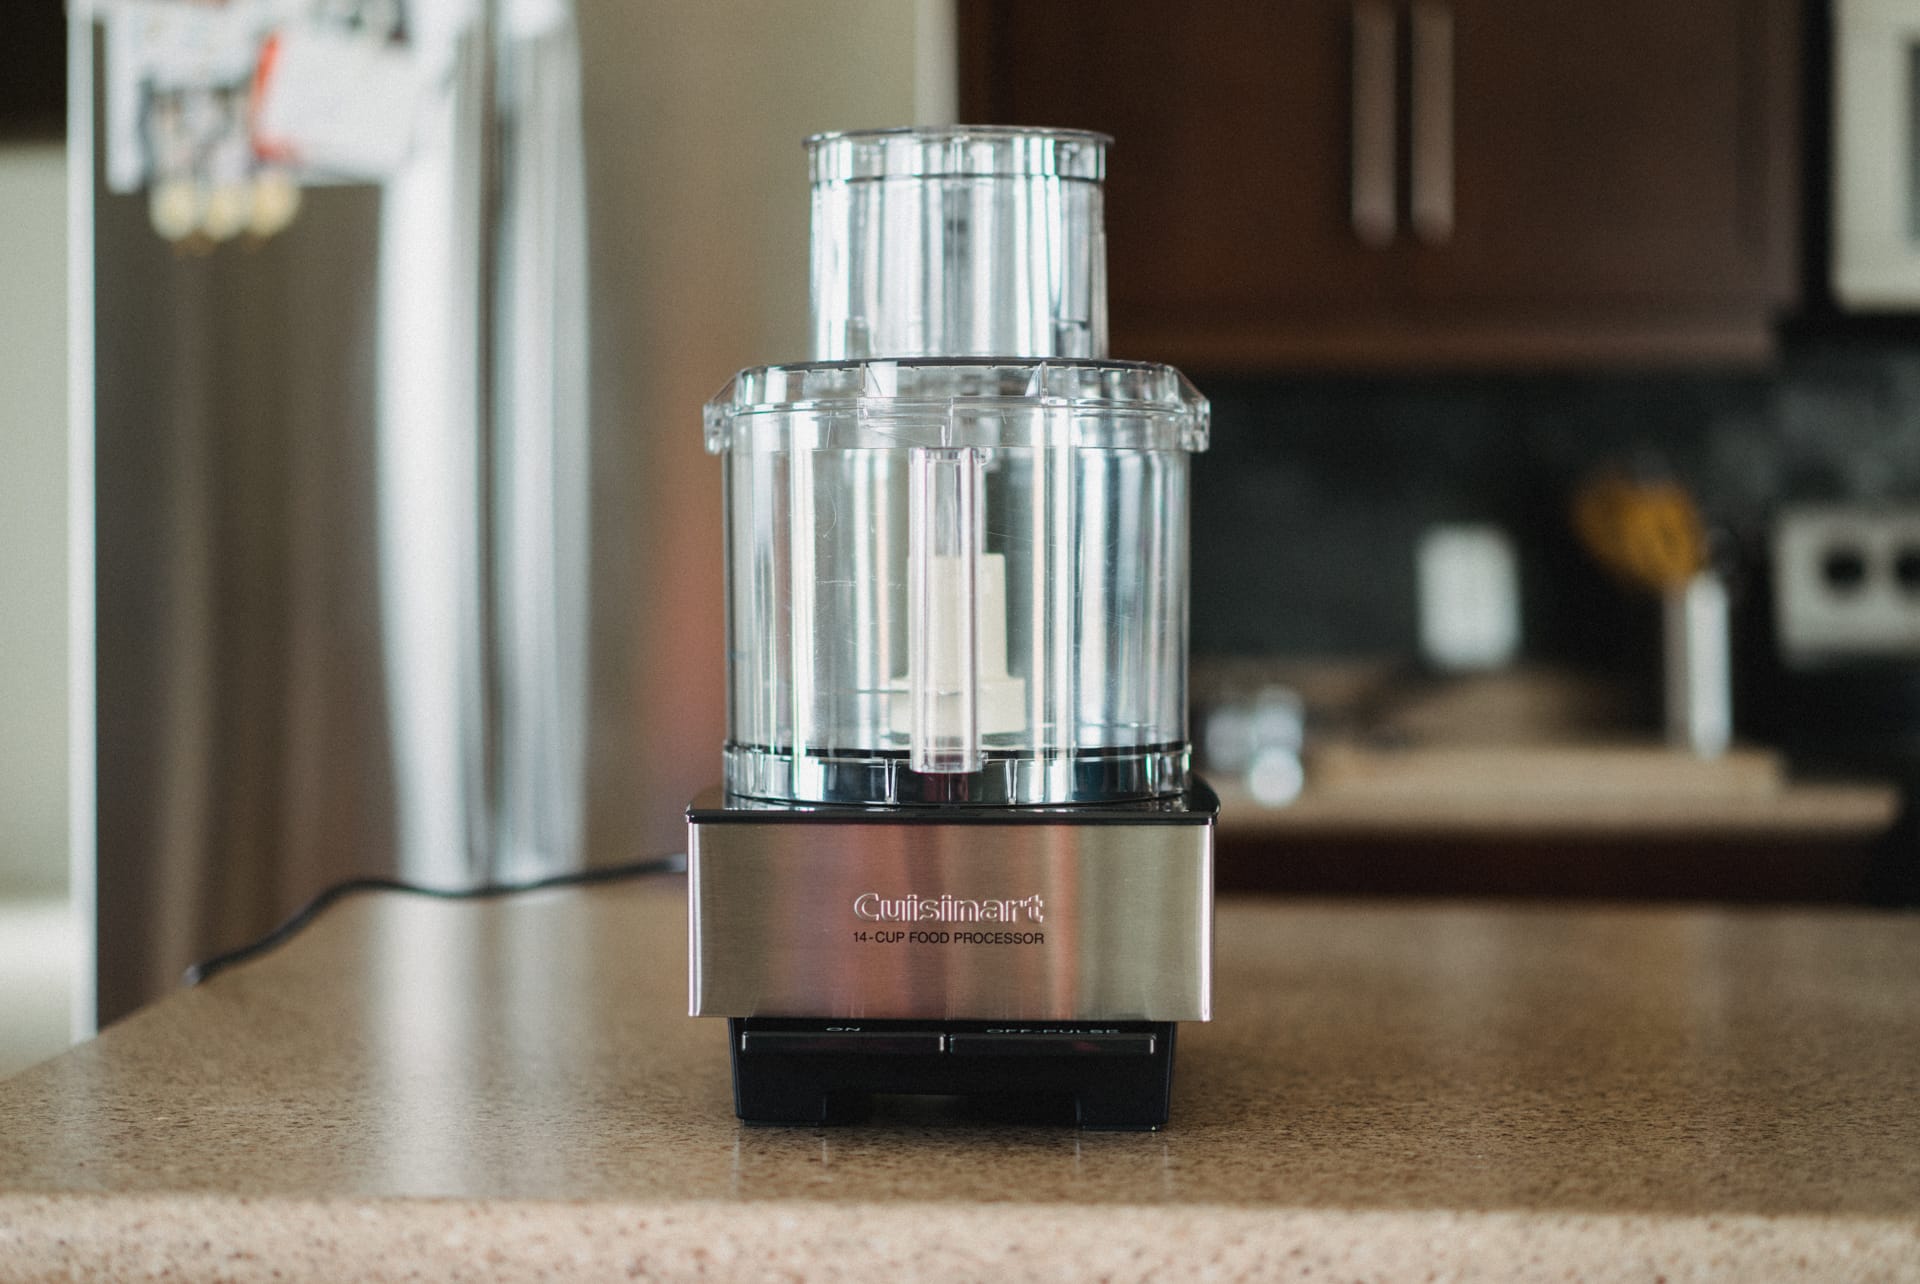 How To Use Cuisinart 14 Cup Food Processor